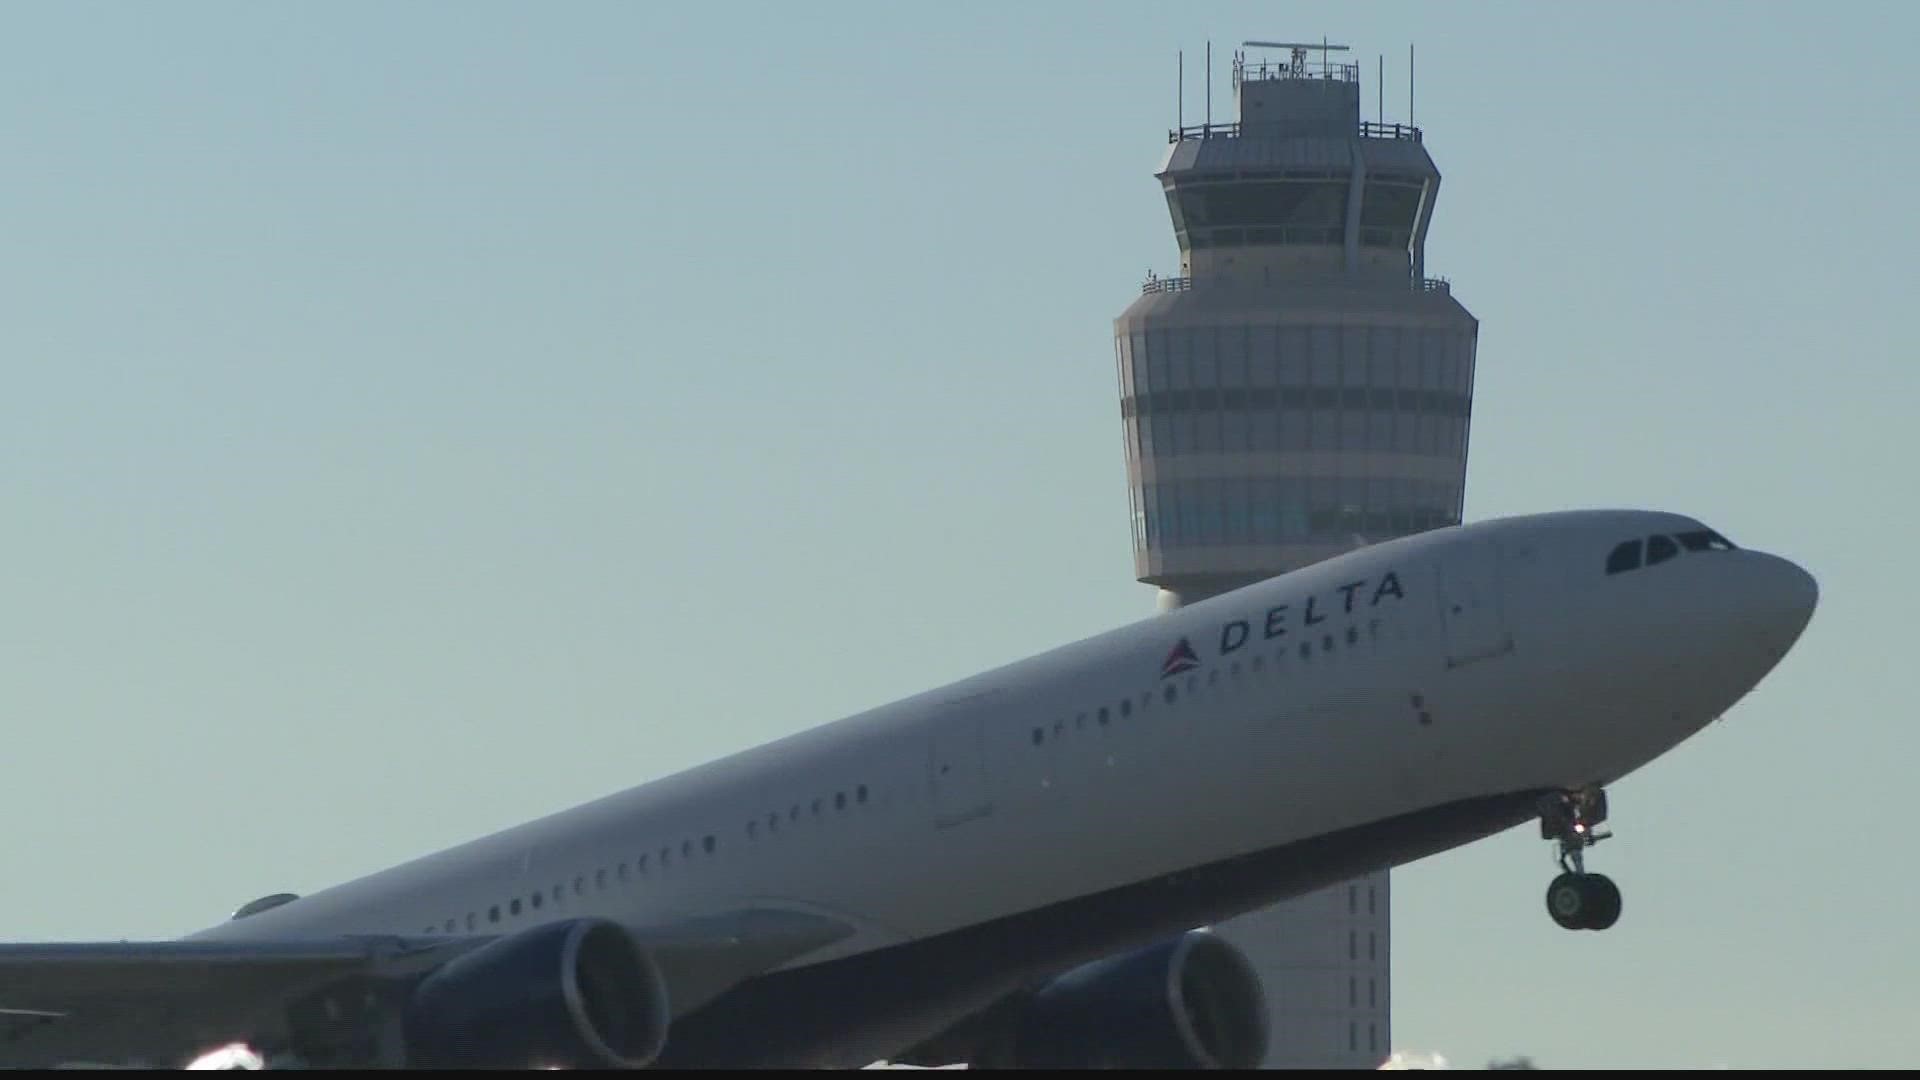 Here's what it looks like at the world's busiest airport.